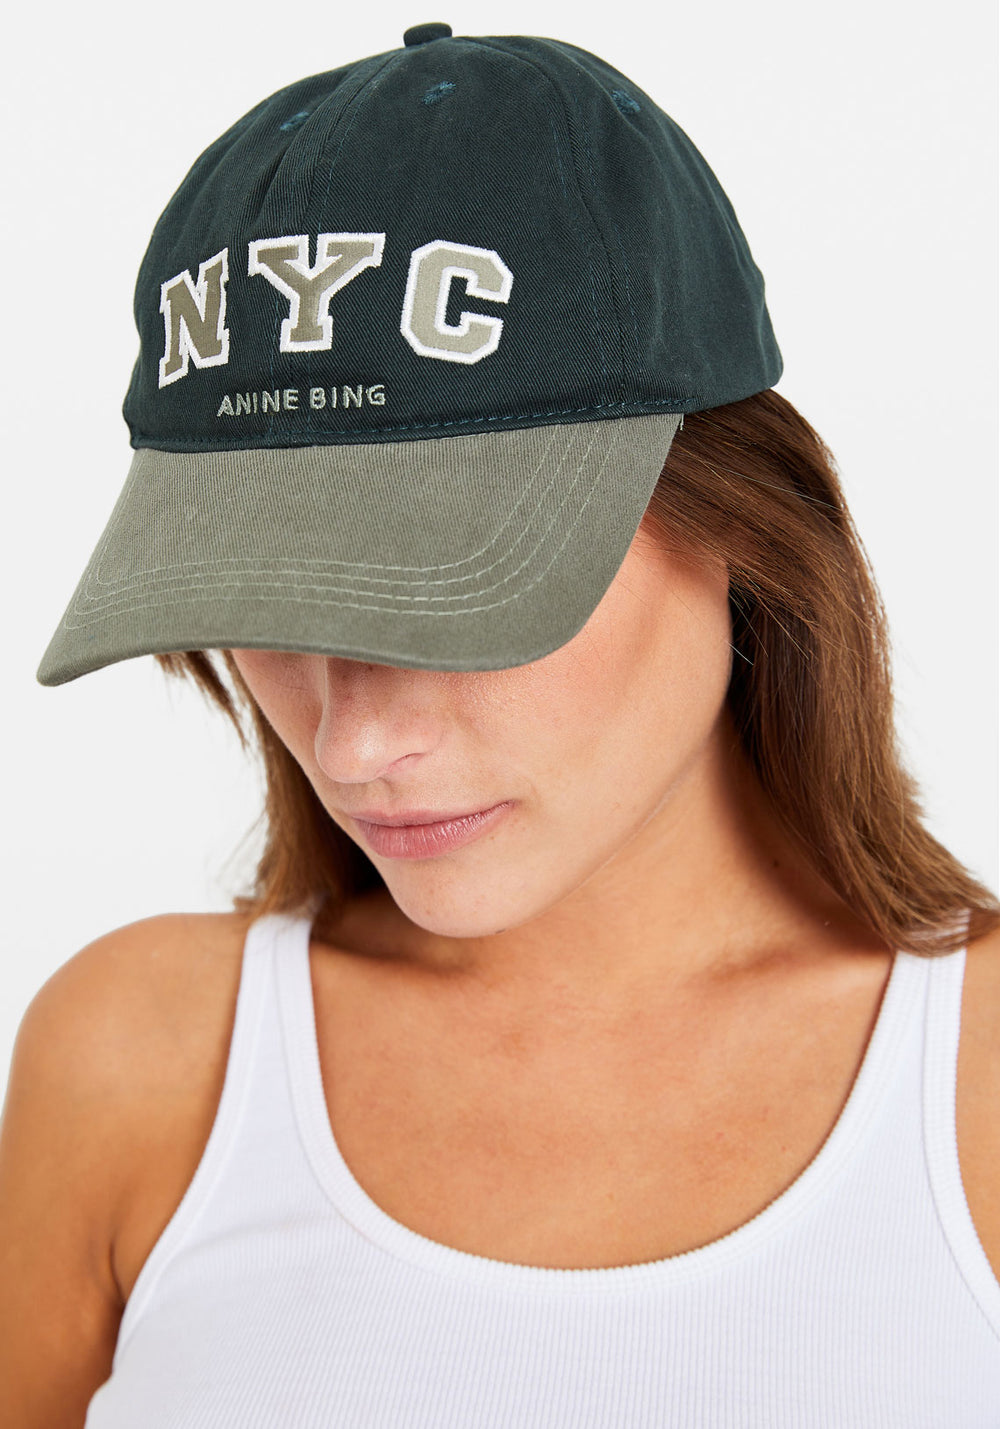 Anine Bing Casquette Jeremy Baseball – NYC Charcoal Green